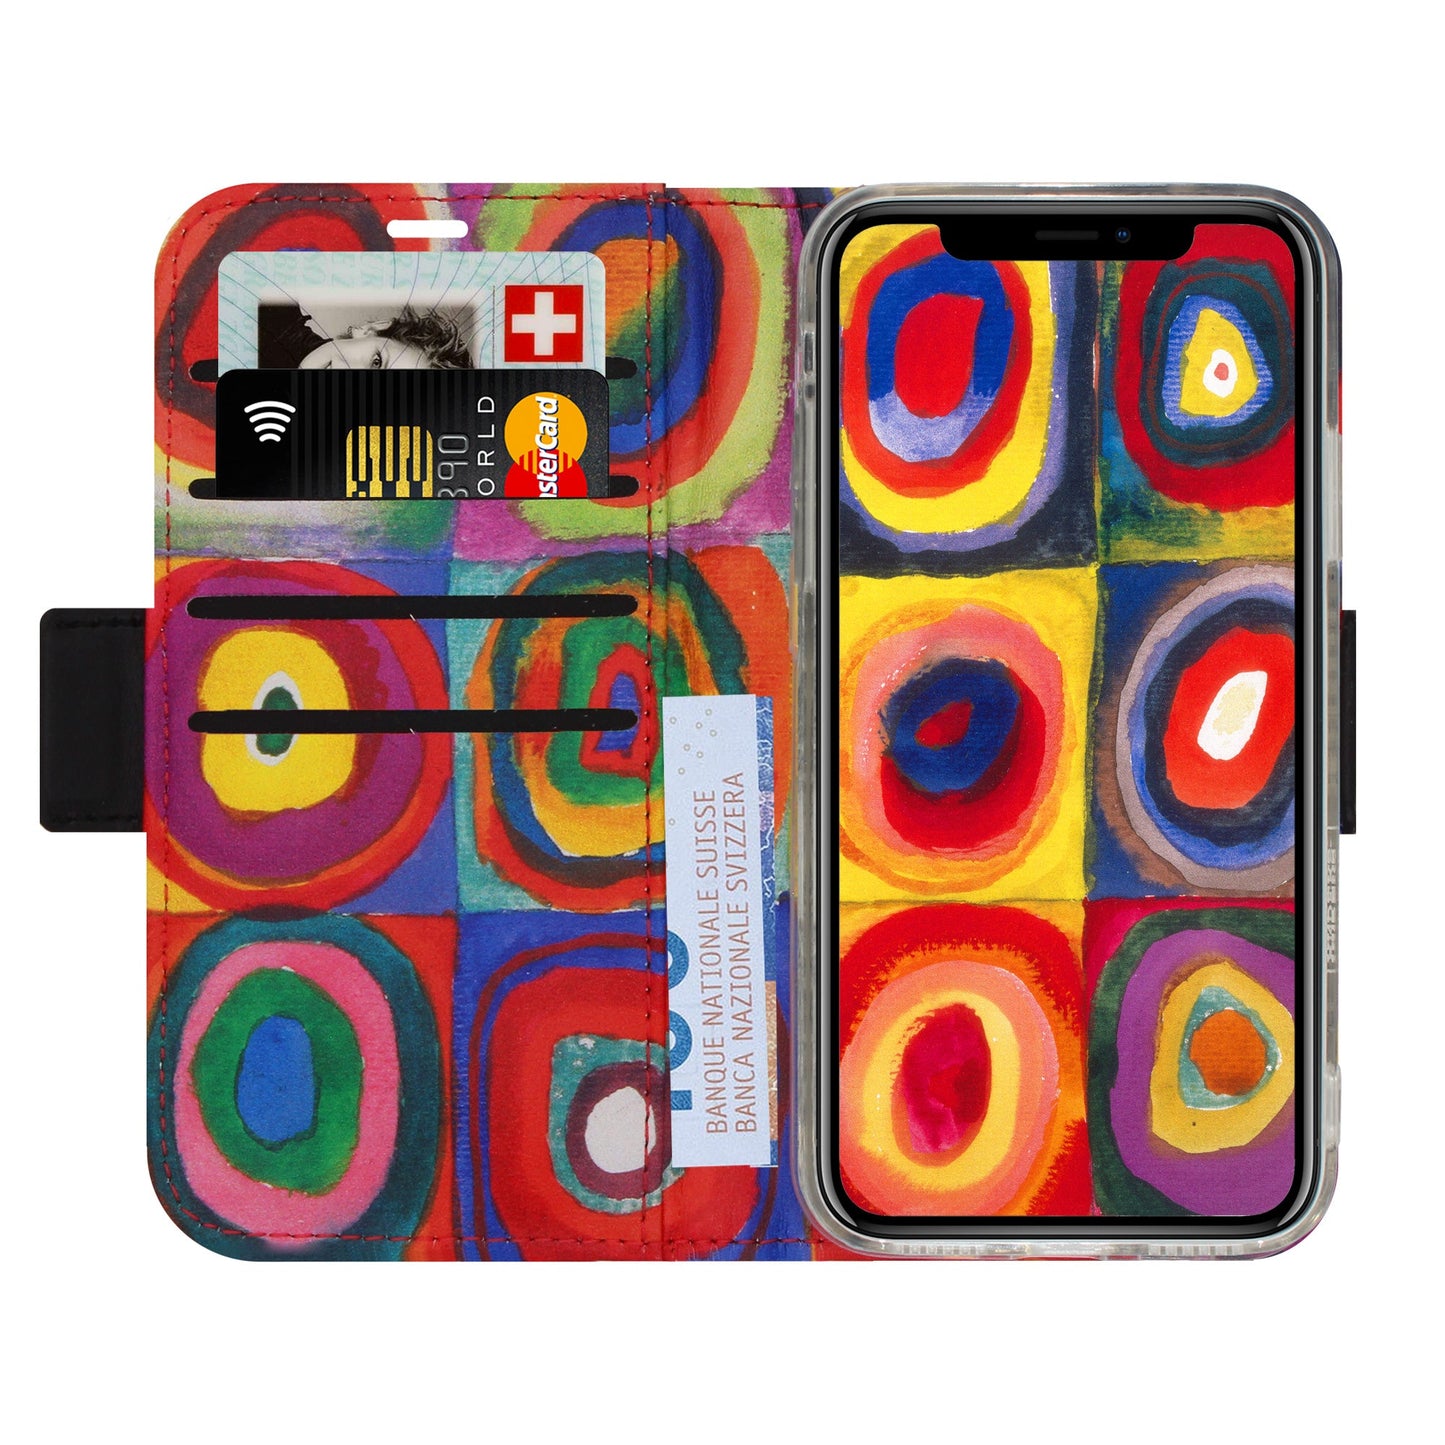 Kandinsky Victor Case for iPhone 12 Pro Max